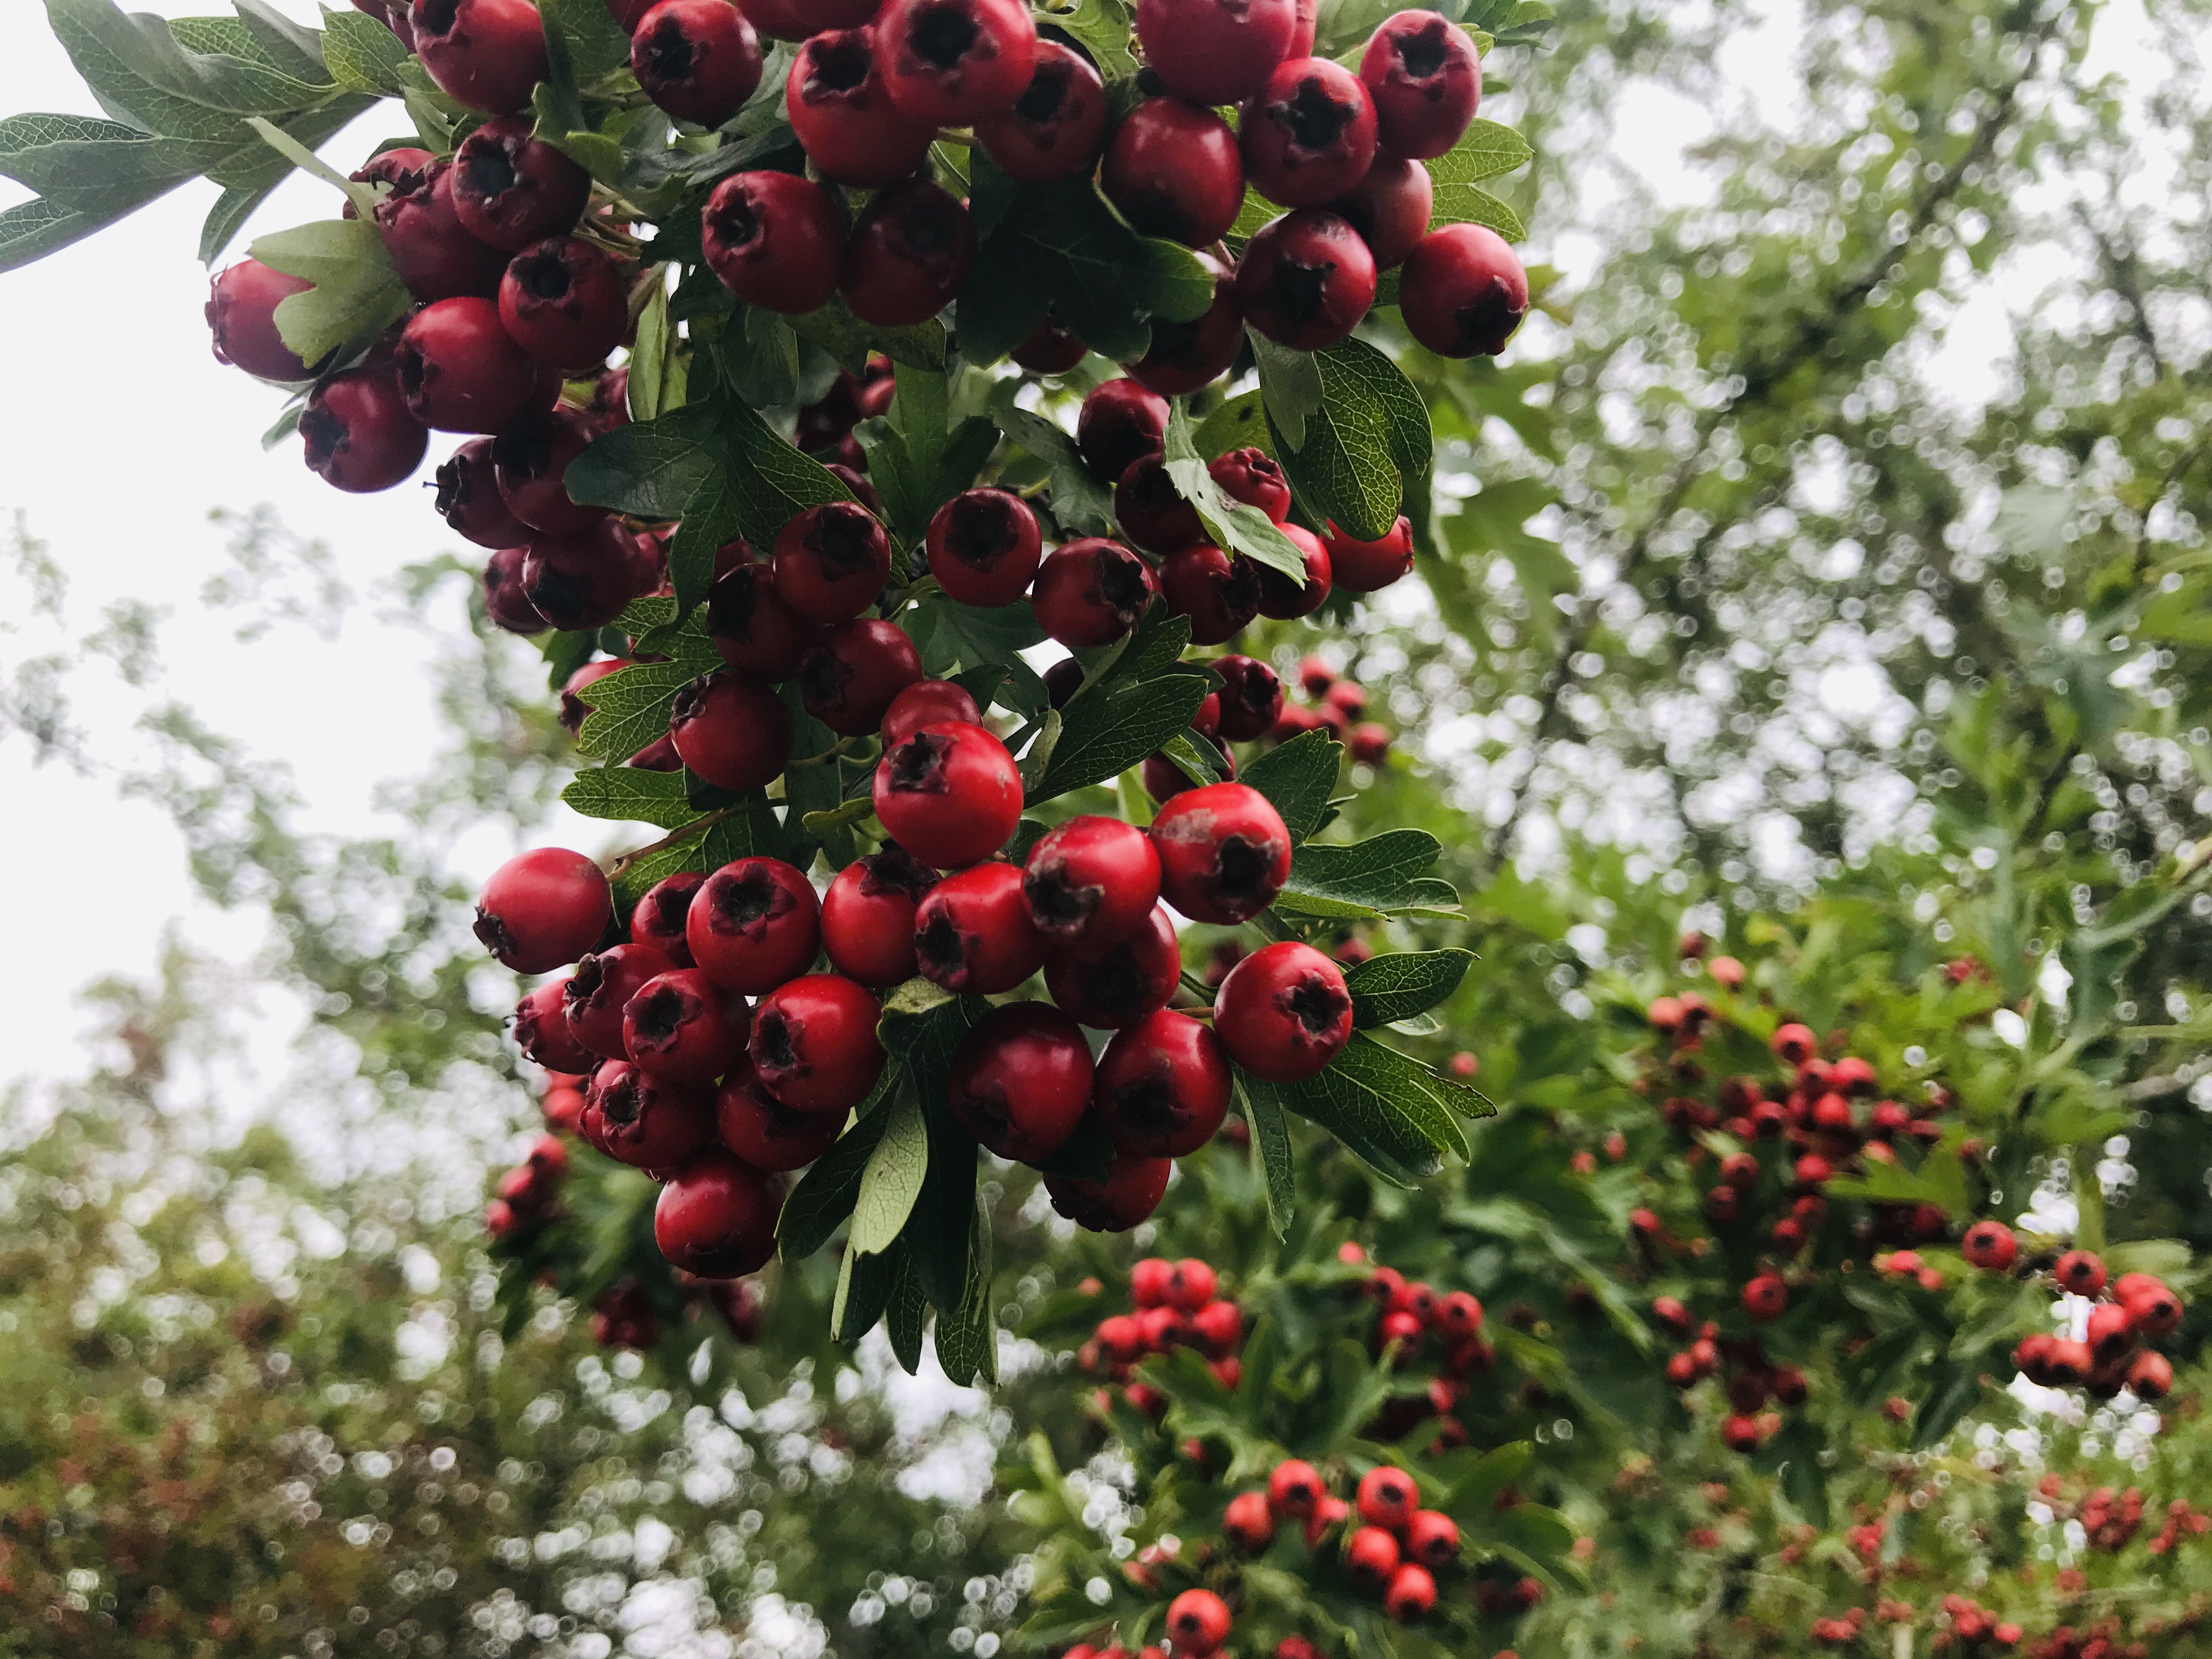 Bright red hawthorn berries